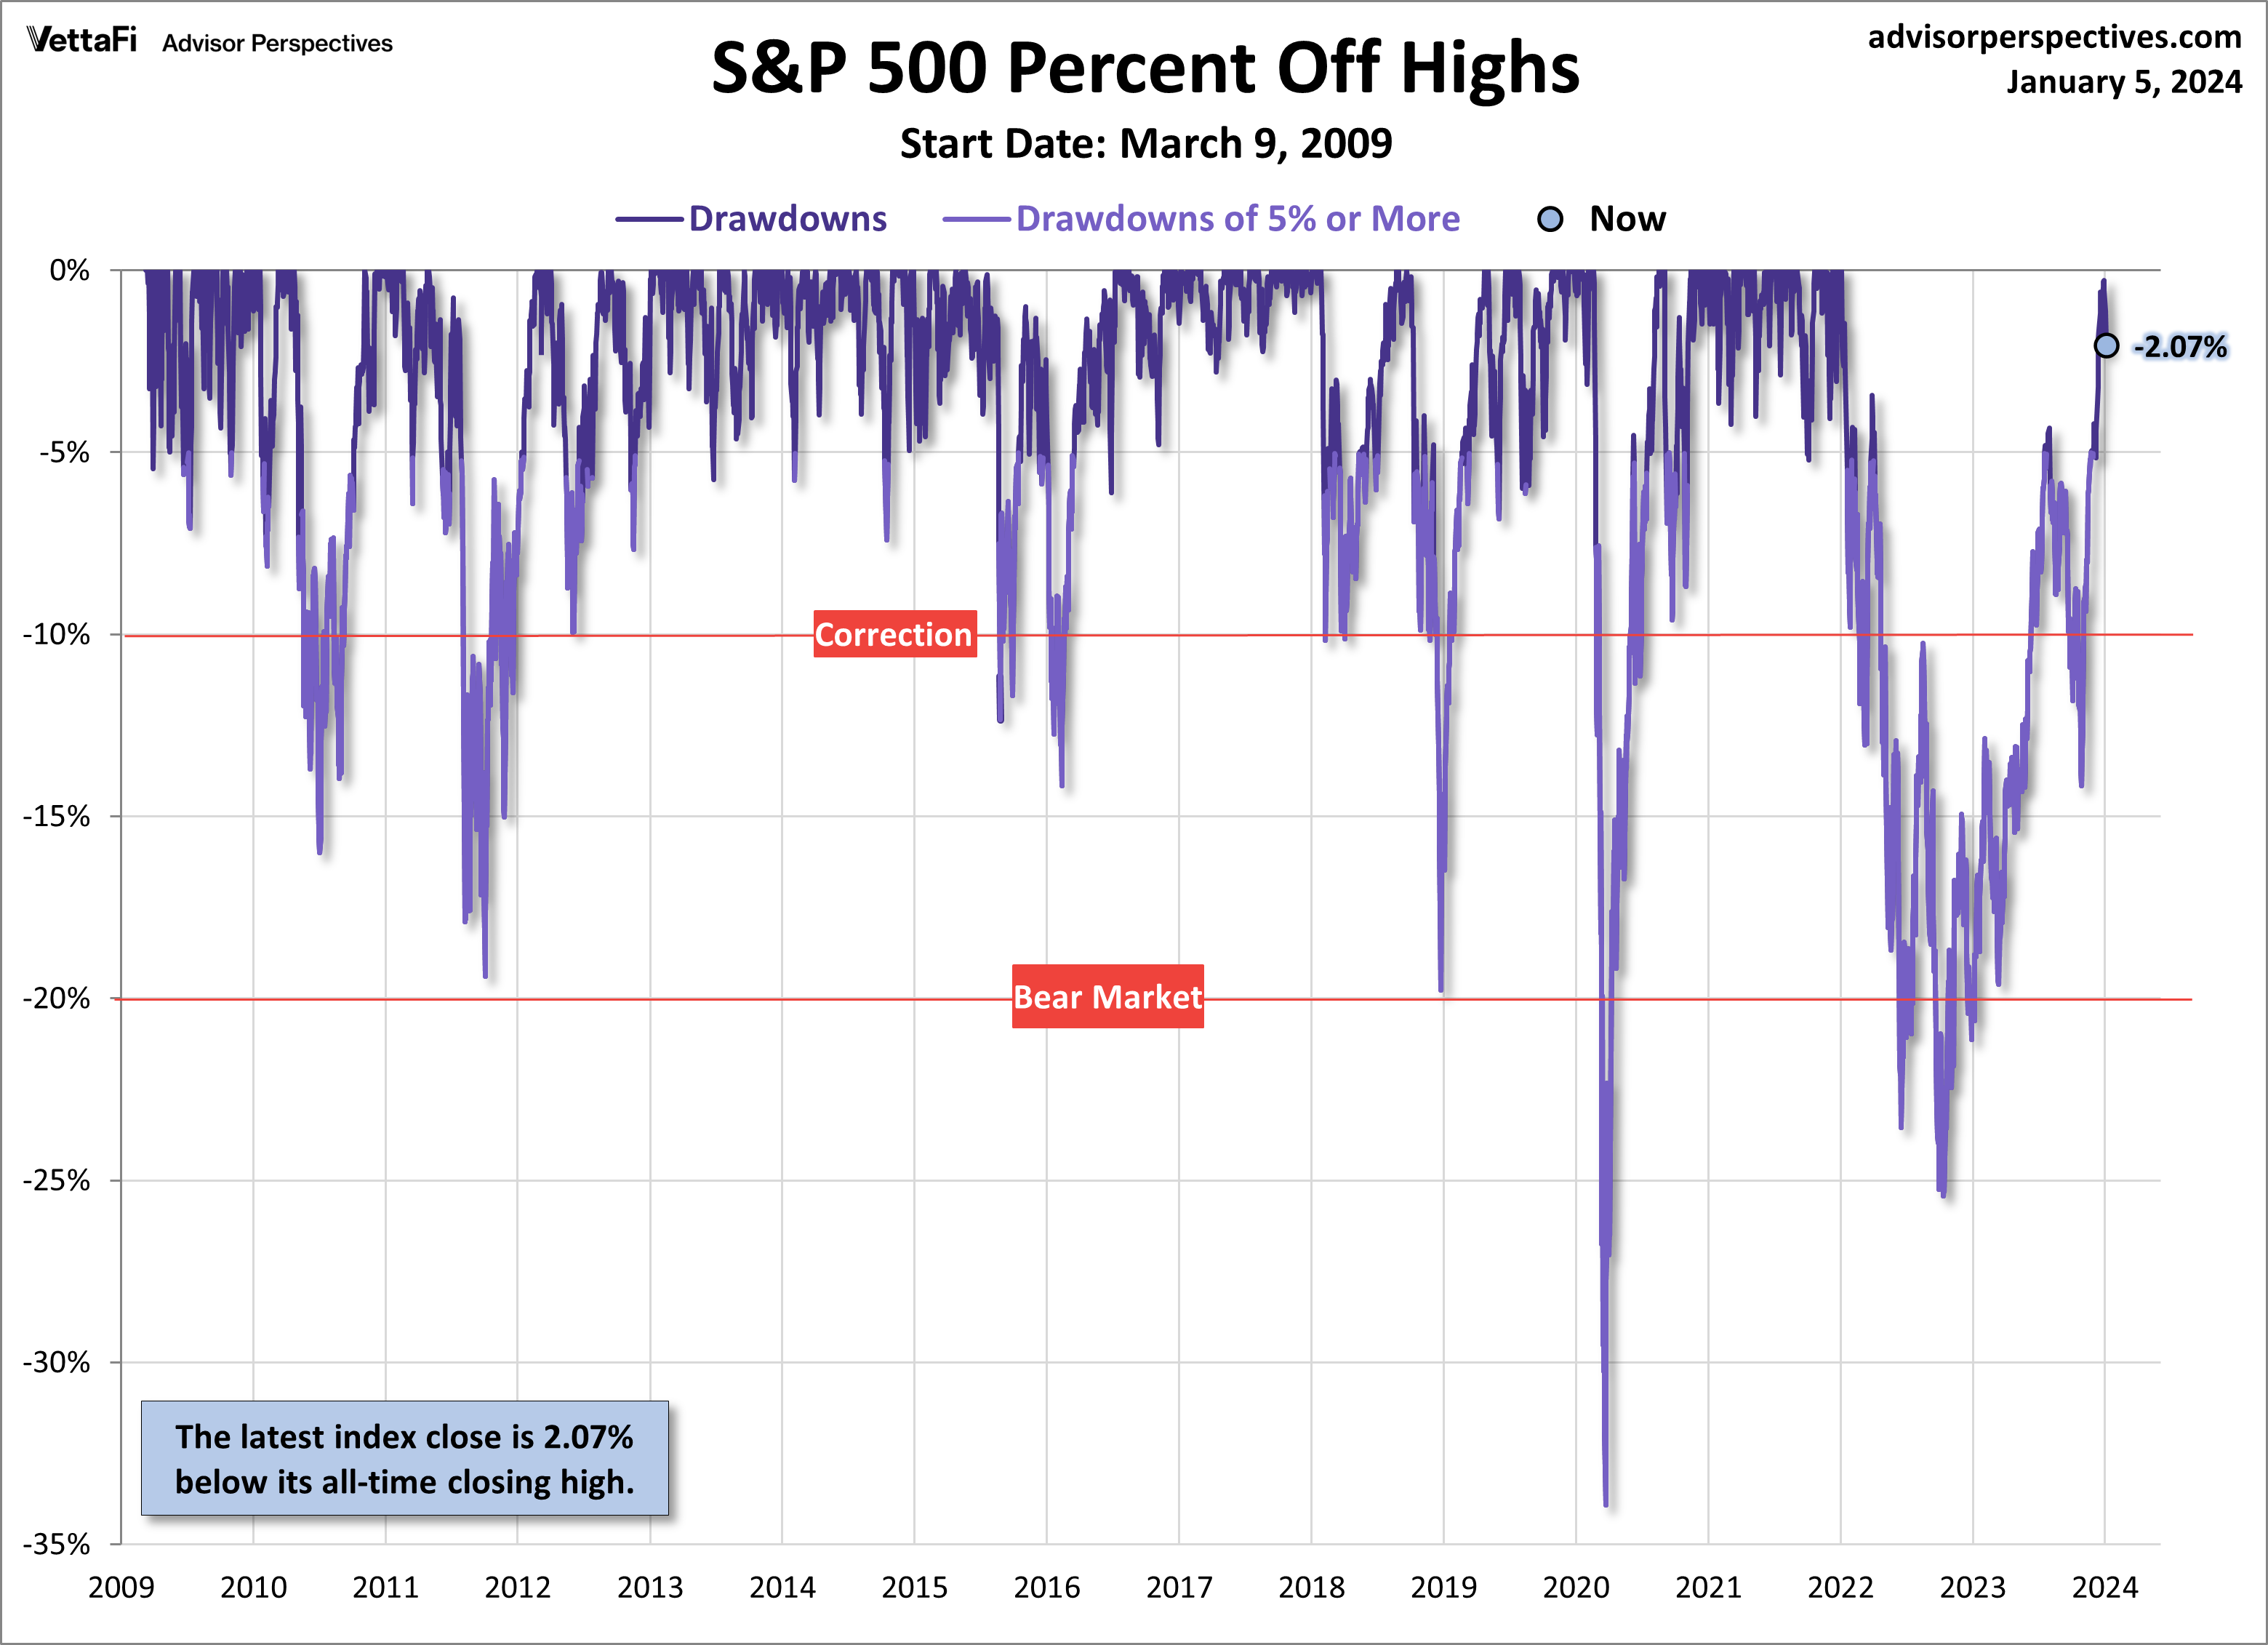 SP 500 Percent Off Highs since March 9 2009